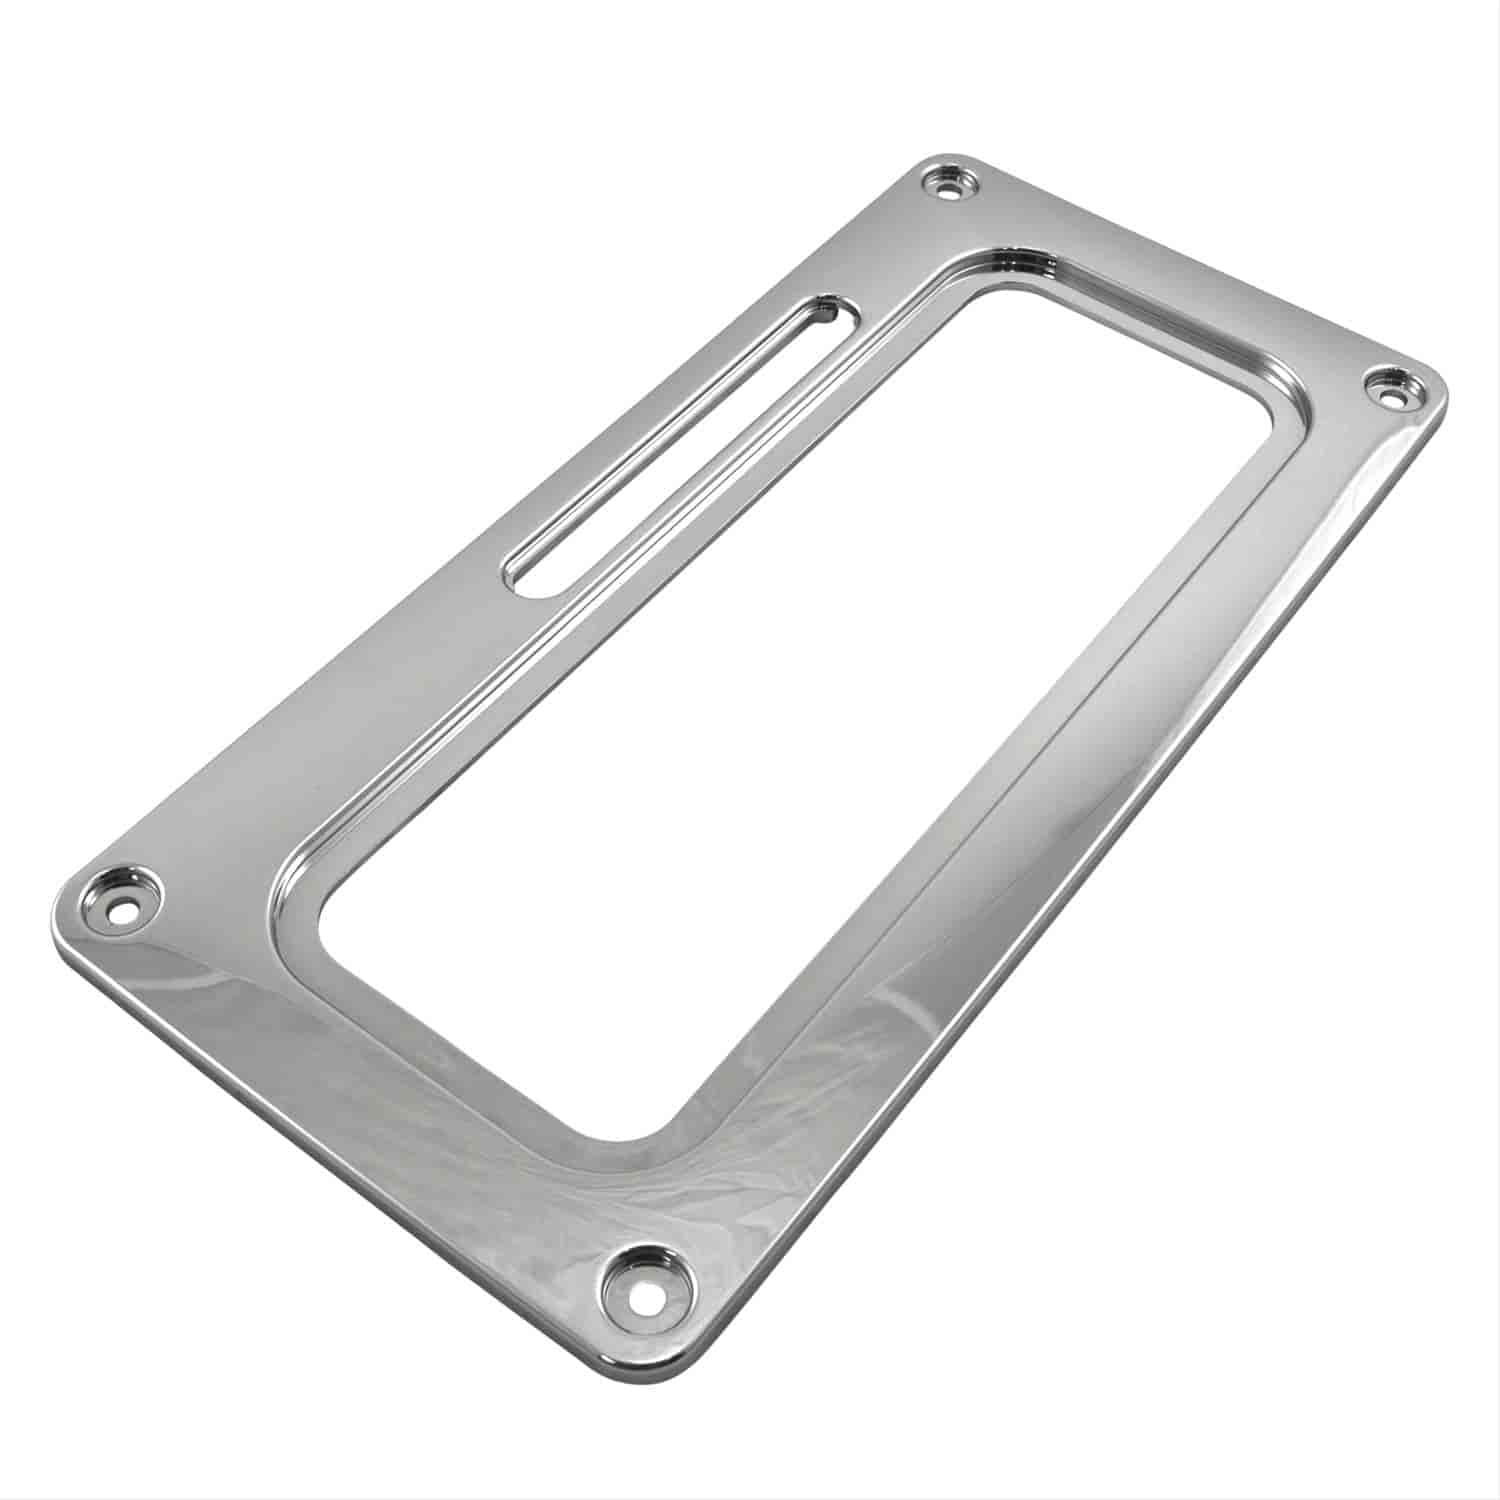 Replacement Shifter Cover Plate For Use With 130-80680,